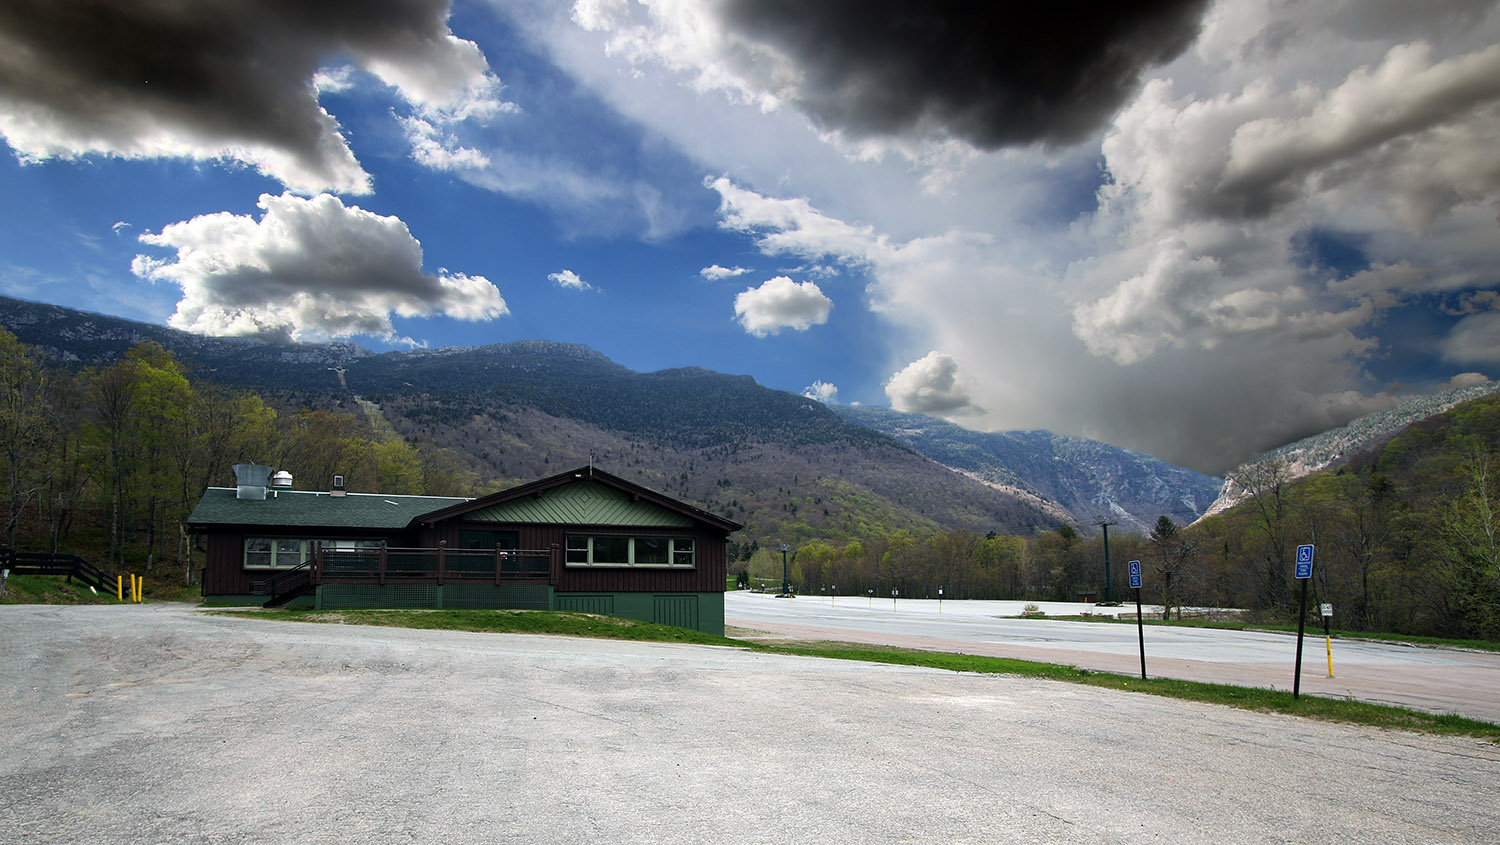 An image from near the Mt. Mansfield Base Lodge showing Smuggler's Notch and various clouds on a spring ski day with thunderstorms in the area near Stowe Mountain Ski Resort in Vermont